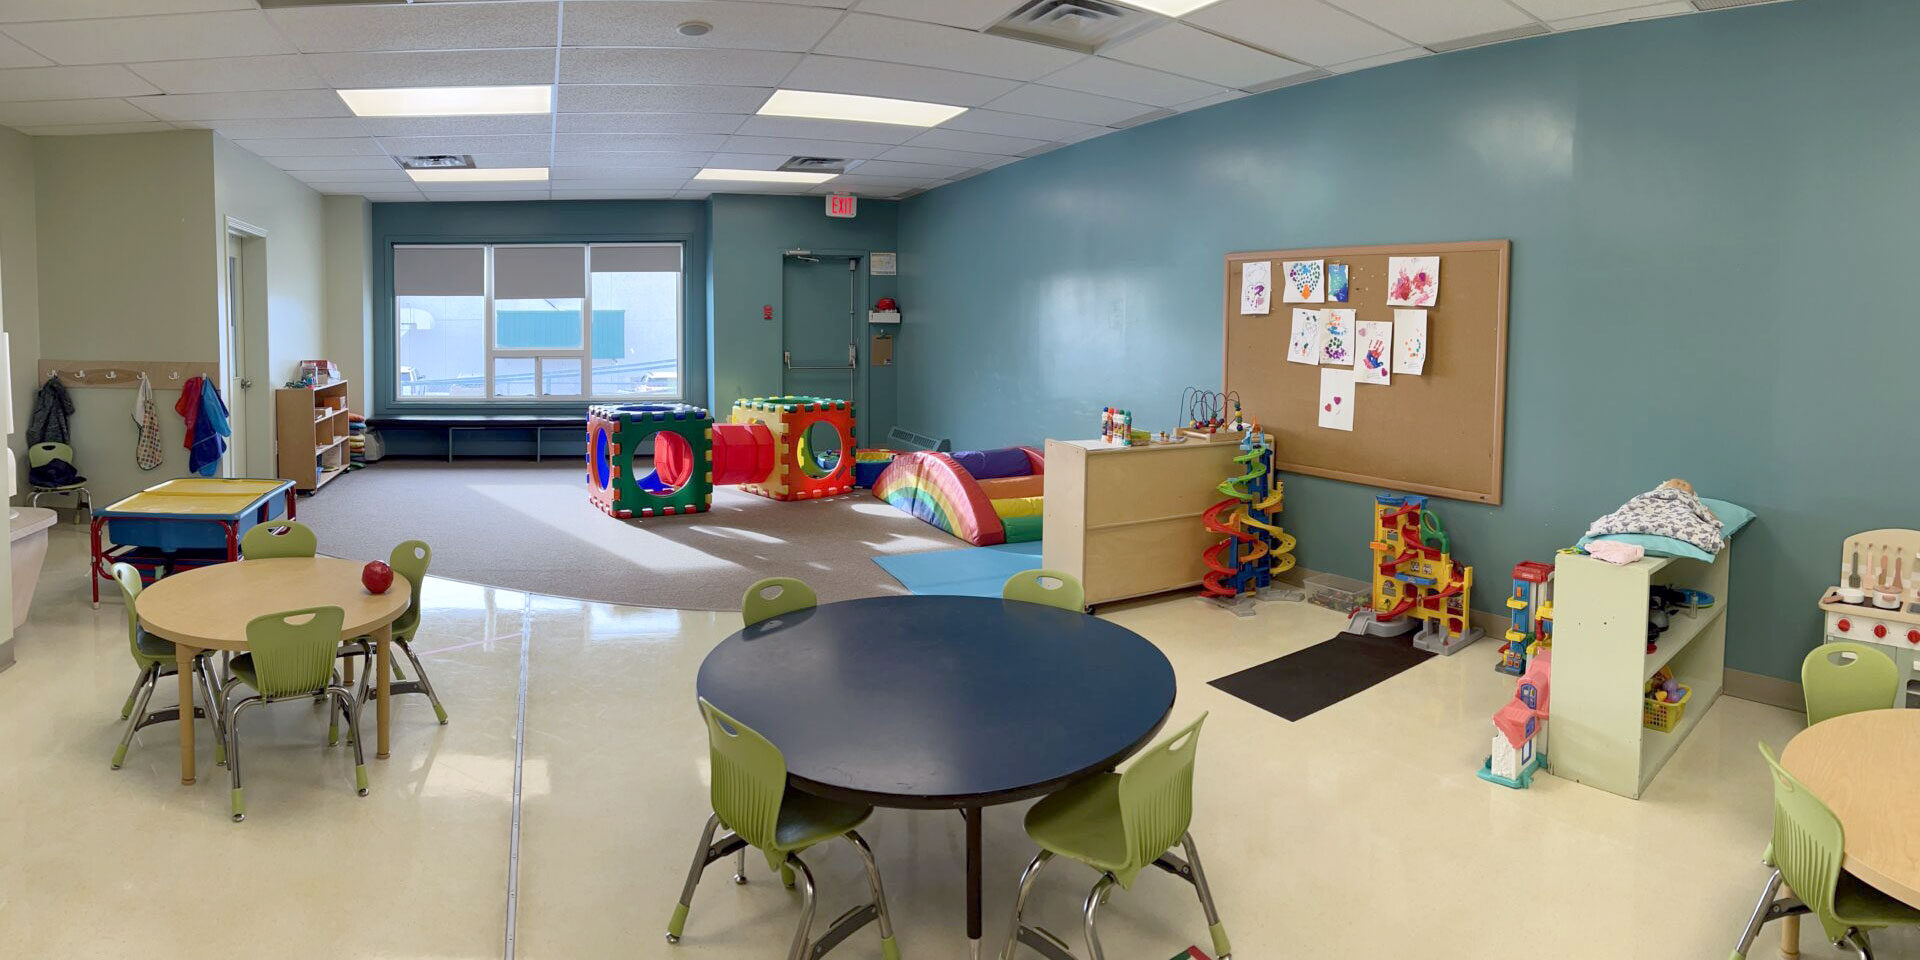 Drop-In Playgroup room at the South Peace Child Development Centre